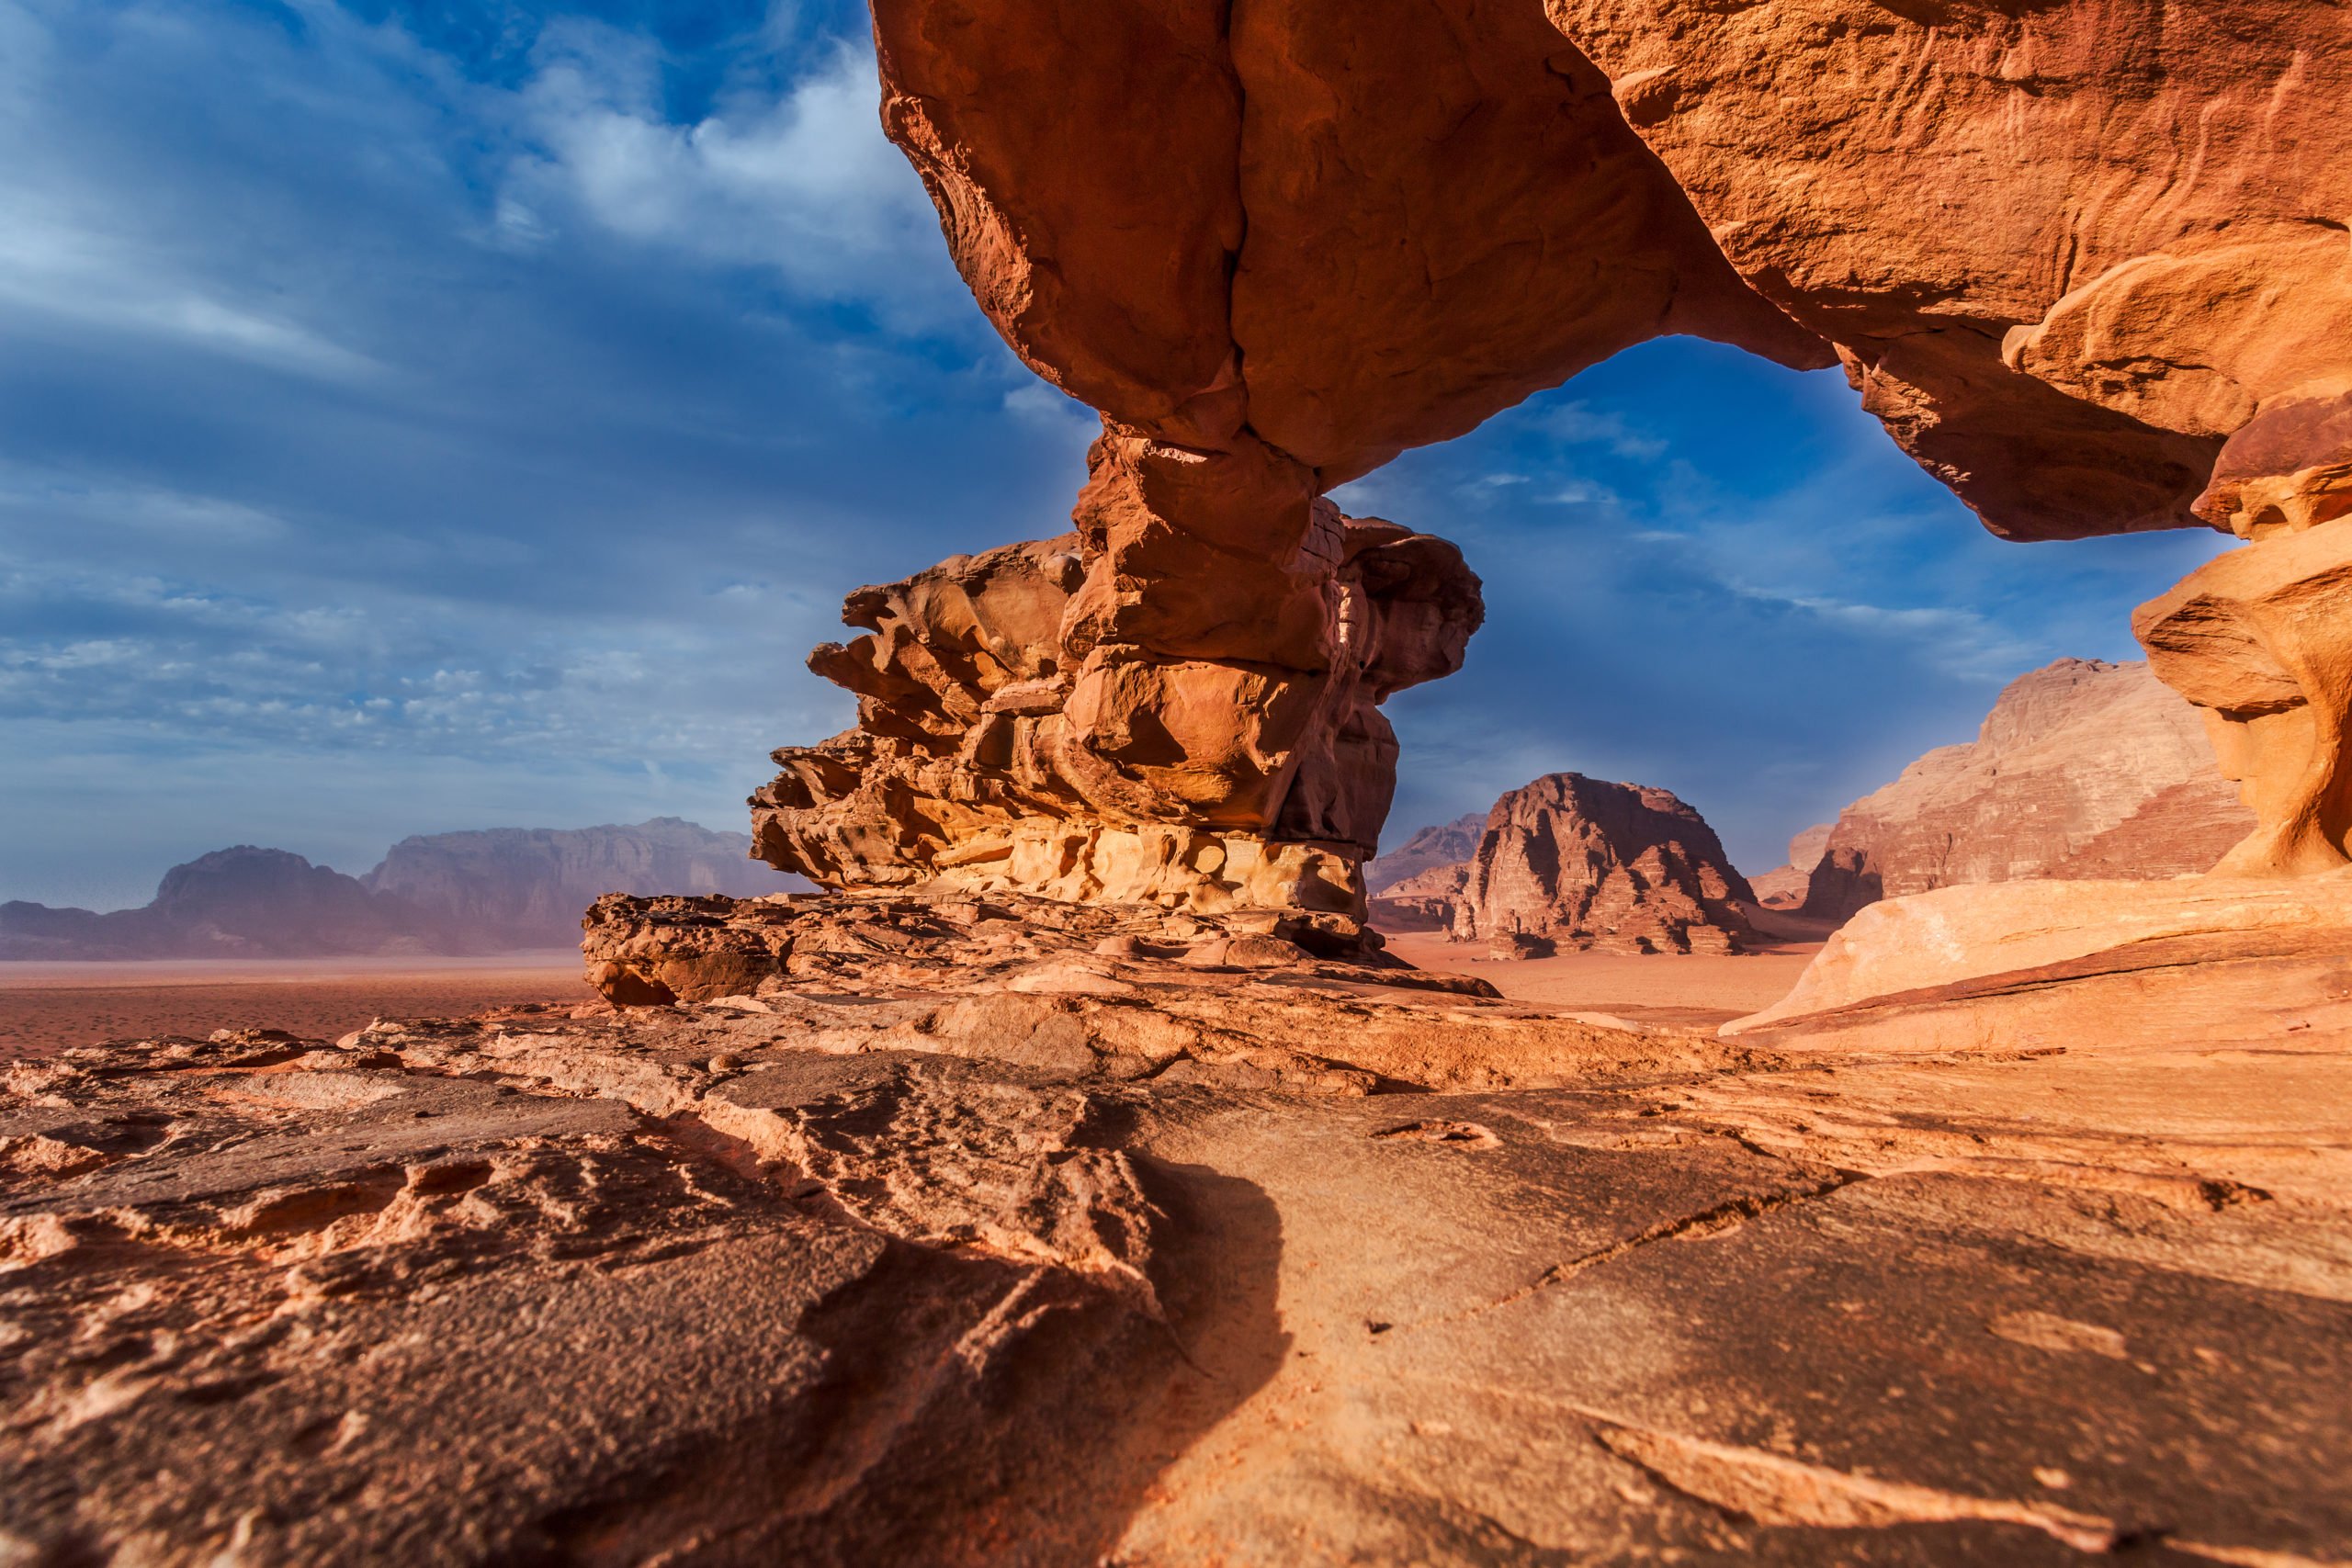 Experience The Beauty Of Wadi Rum Desert On The Petra And Wadi Rum 2 Day Tour From Aqaba